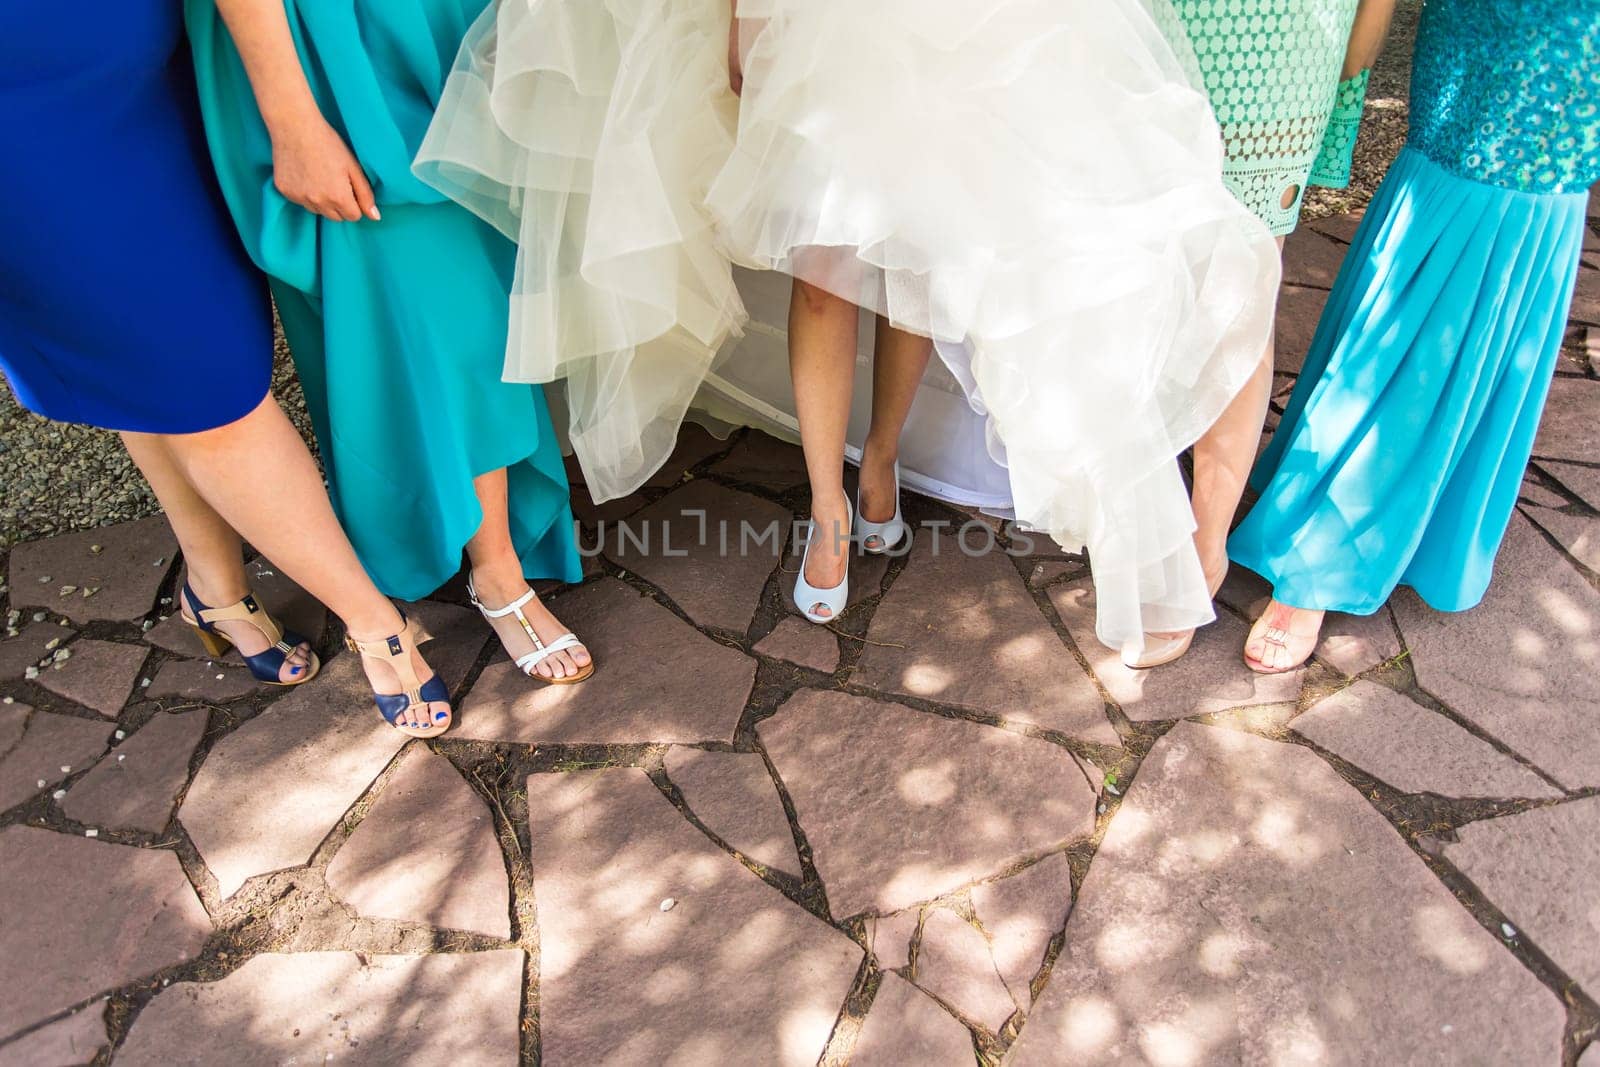 Bride and bridesmaids show off their shoes at wedding